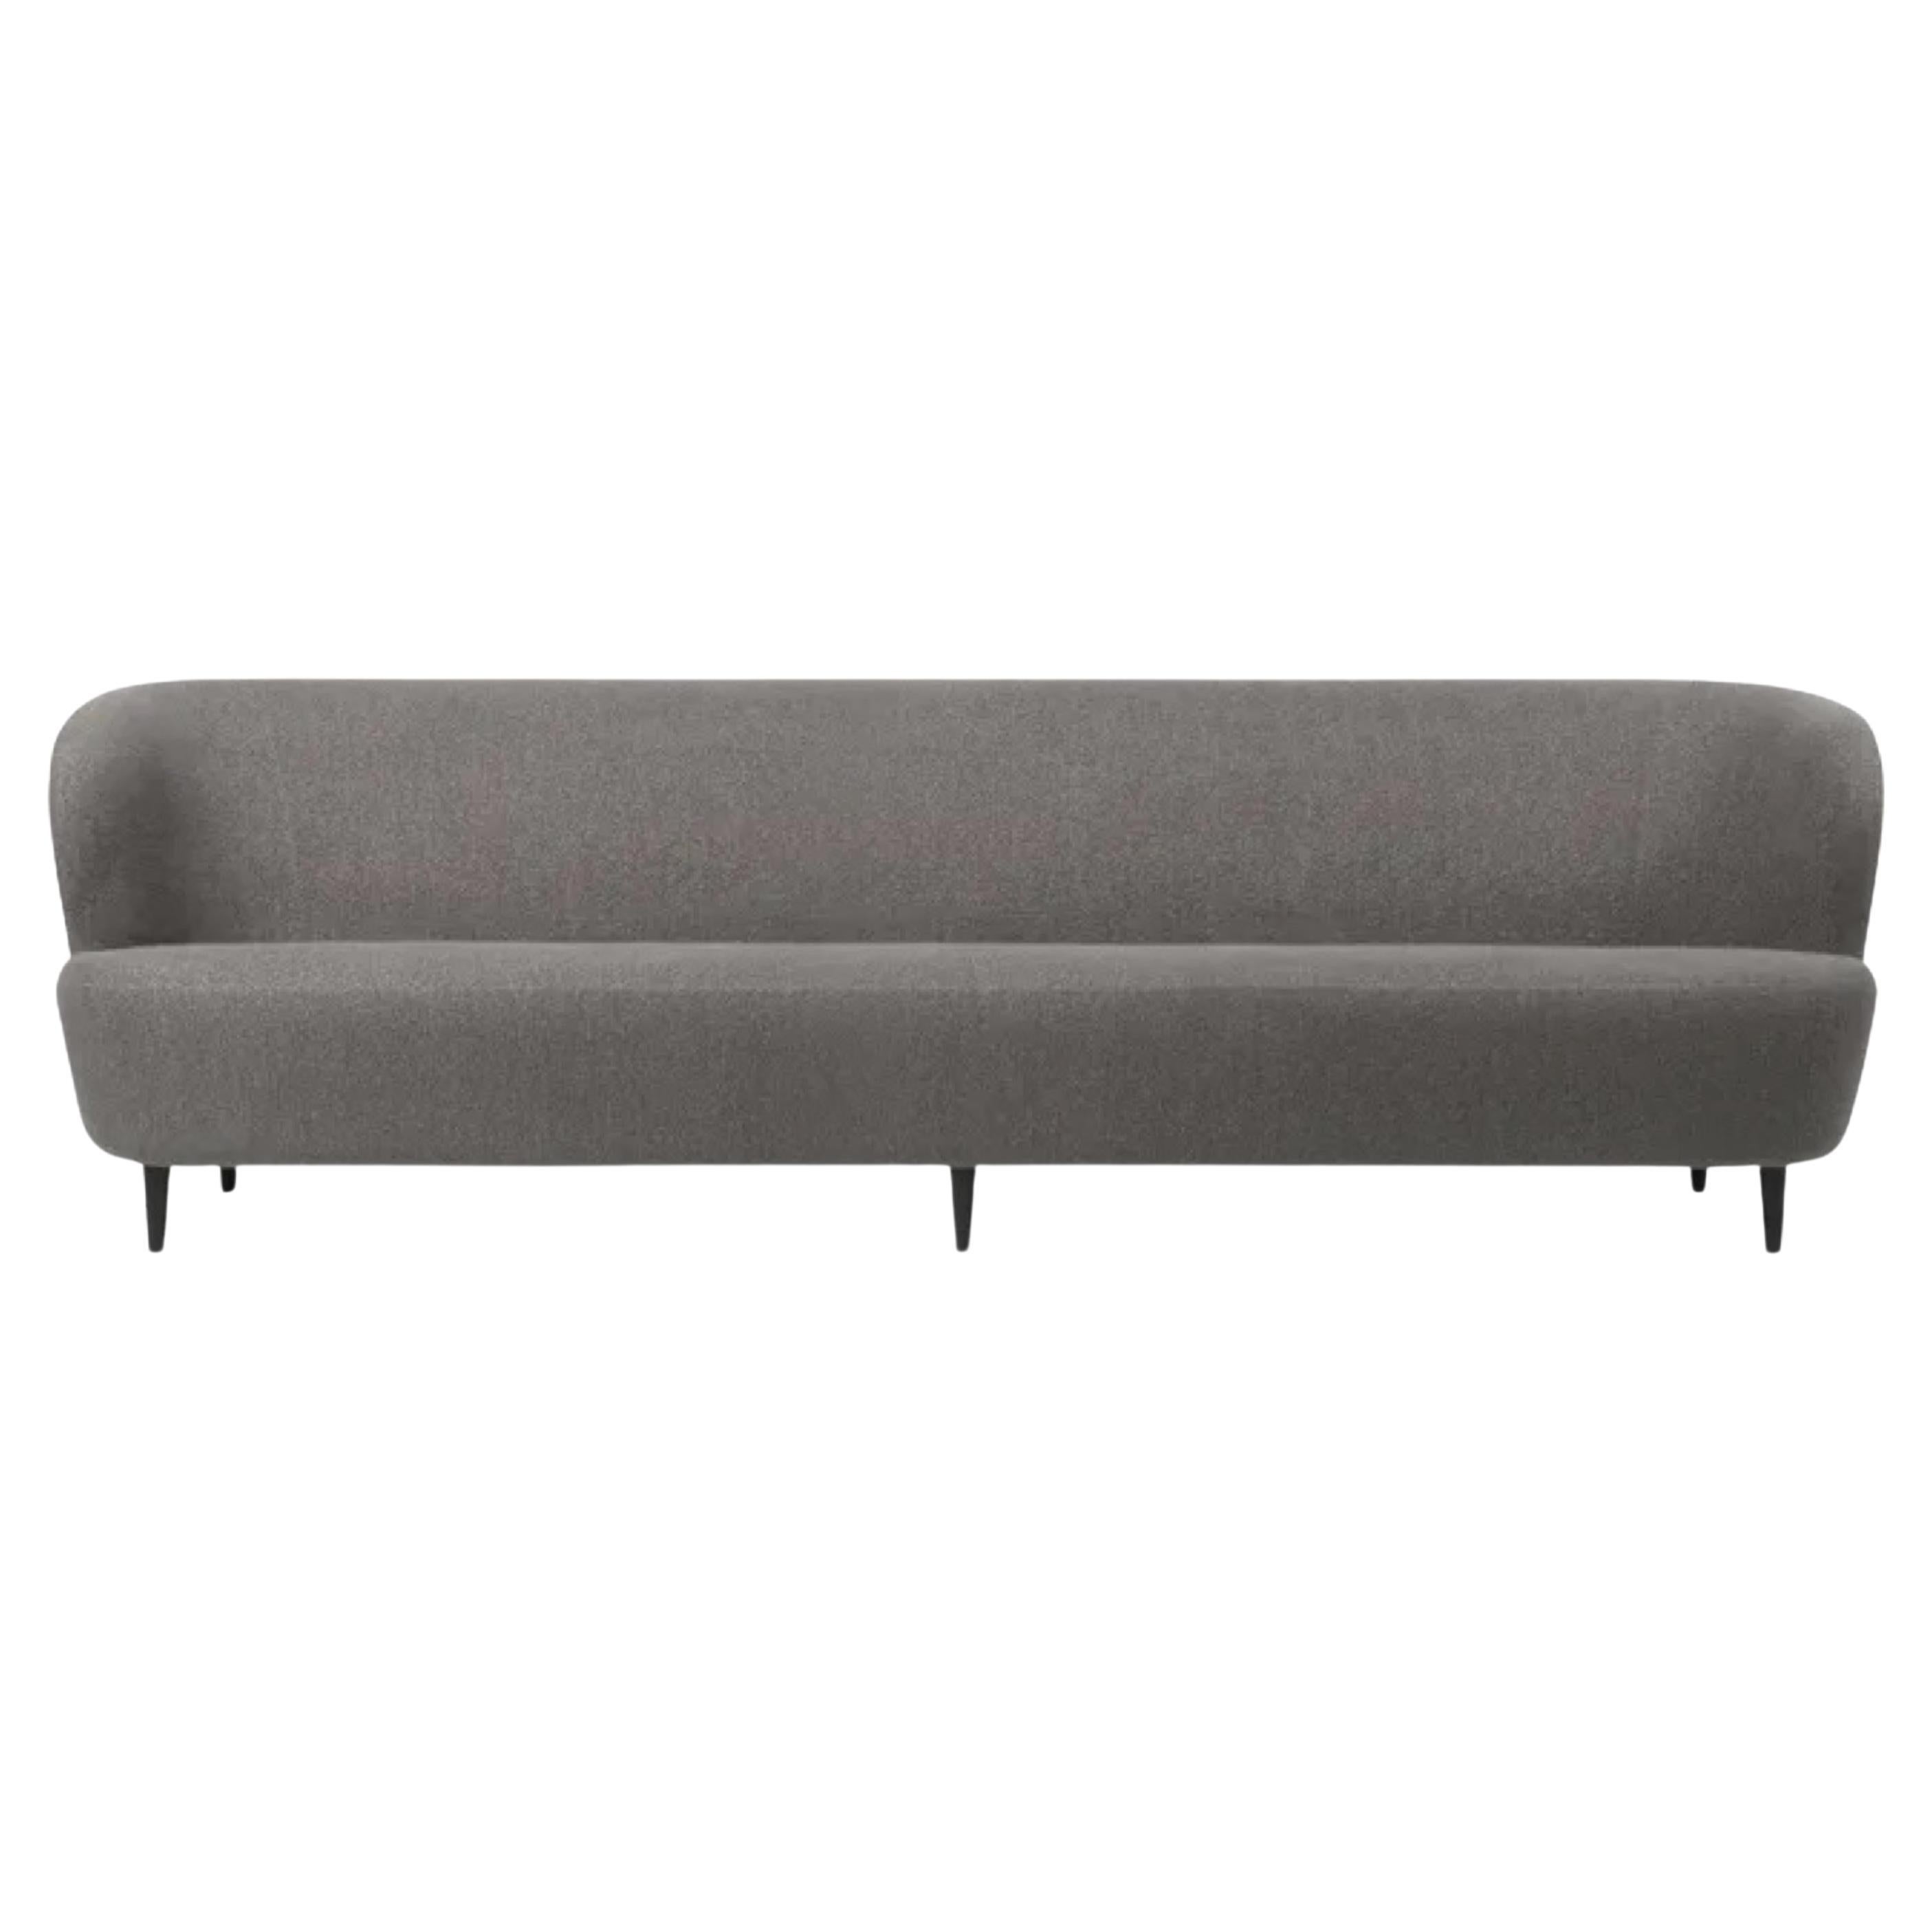 Stay here, stay with me, stay relaxed, stay and read...The Stay Sofa has a sculptural and organic shape that, besides giving a contemporary look, also embraces the user and encourages to stay seated. The characteristic shape is almost like a